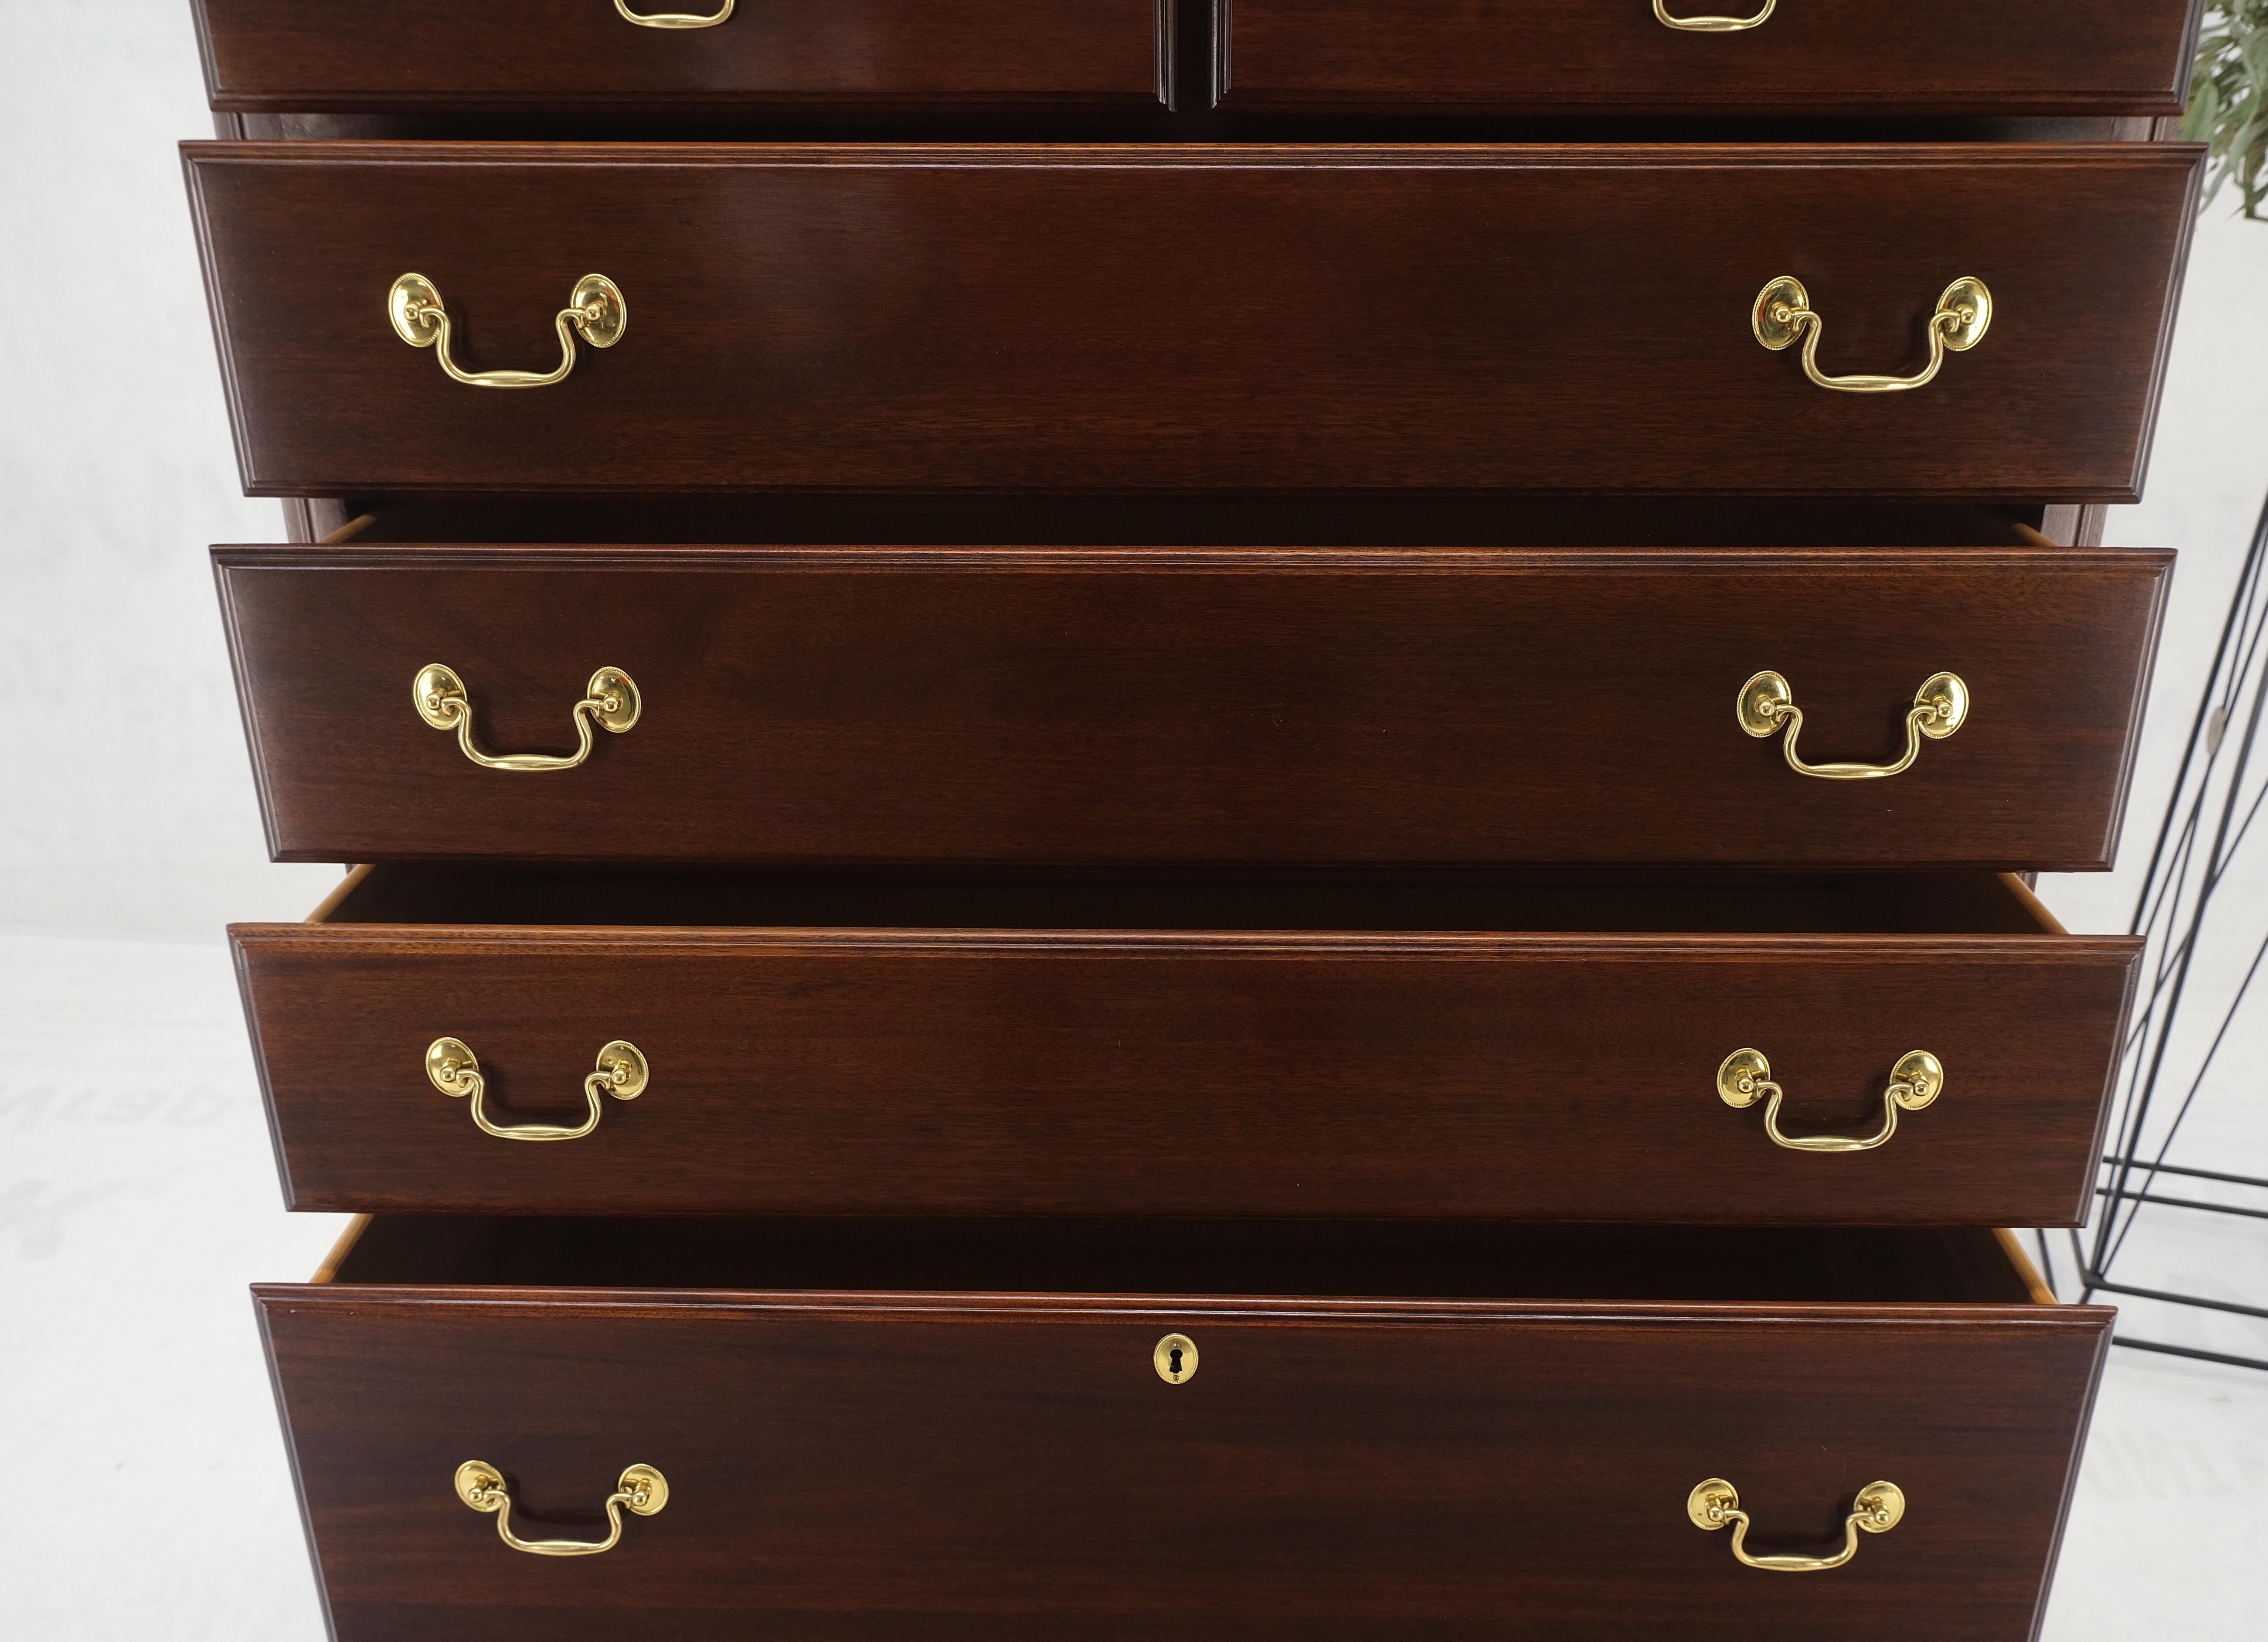 20th Century Solid Mahogany Brass Drop Pulls Federal High Boy Dresser Chest of Drawers MINT! For Sale